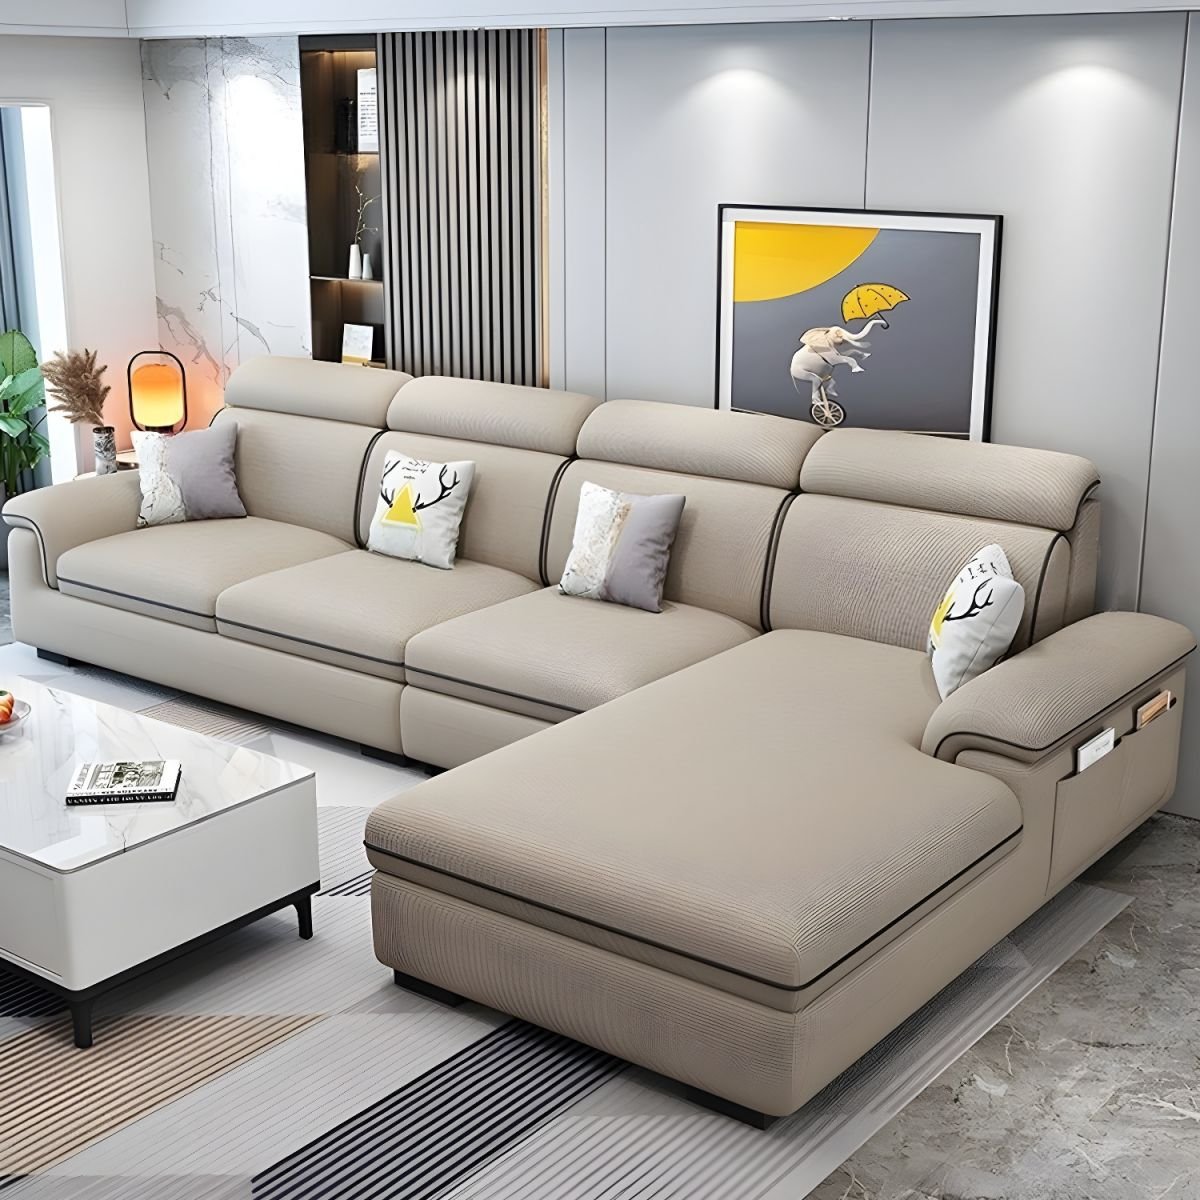 Wooden Modern 9 Feet L-Shape Sectionals No Distressing Seats 4 Storage Included Sofa Chaise - Linen Khaki Right